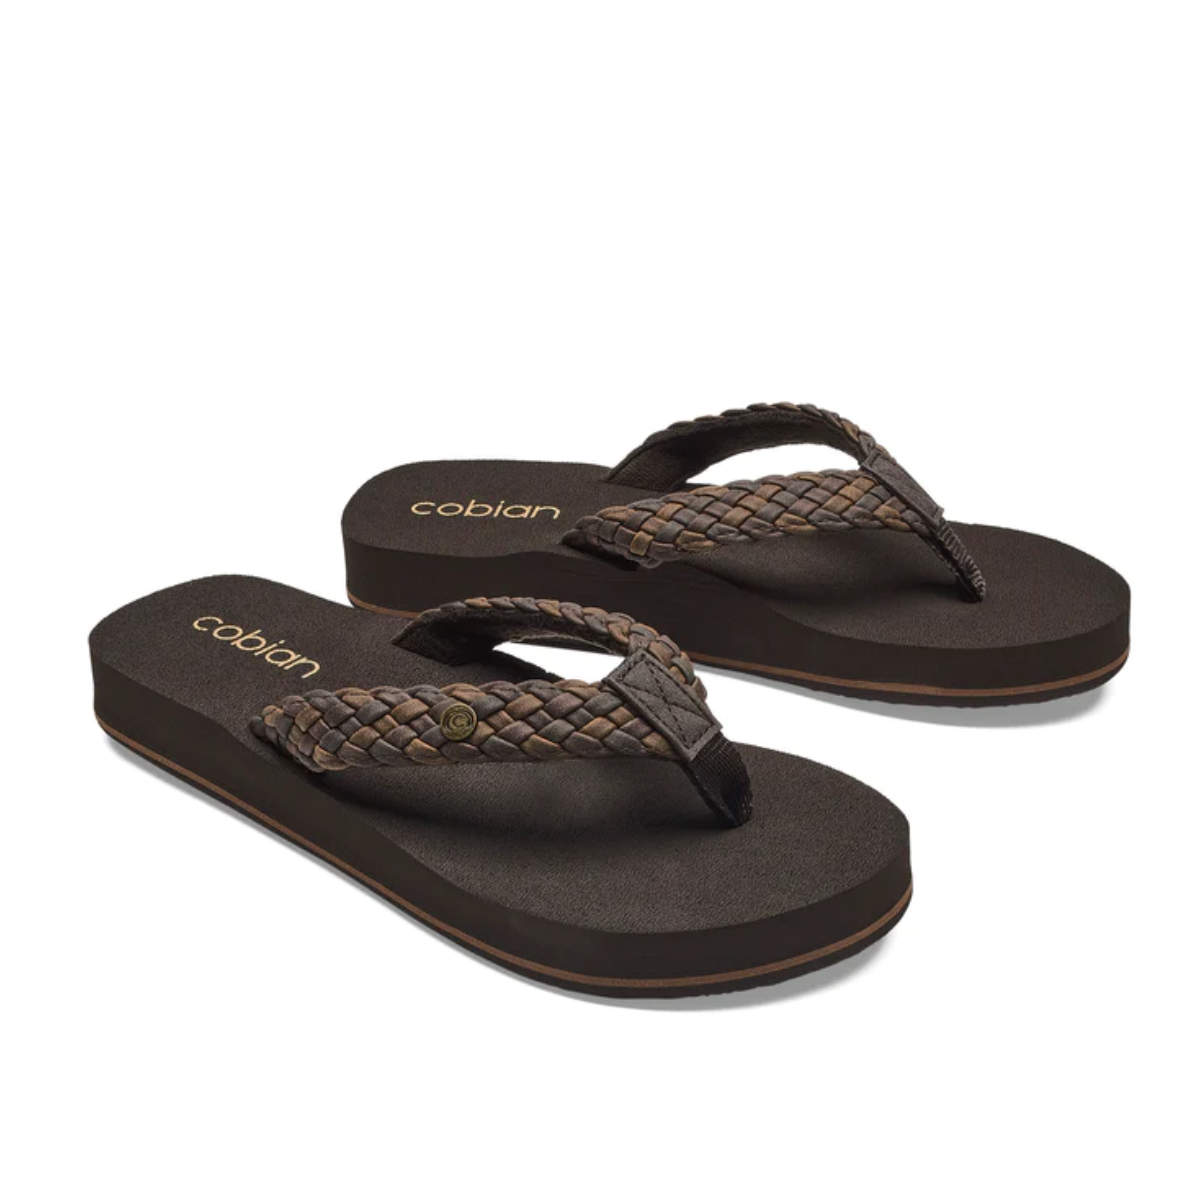 A pair of Braided Bounce by Cobian in Chocolate flip flops for added comfort and style.